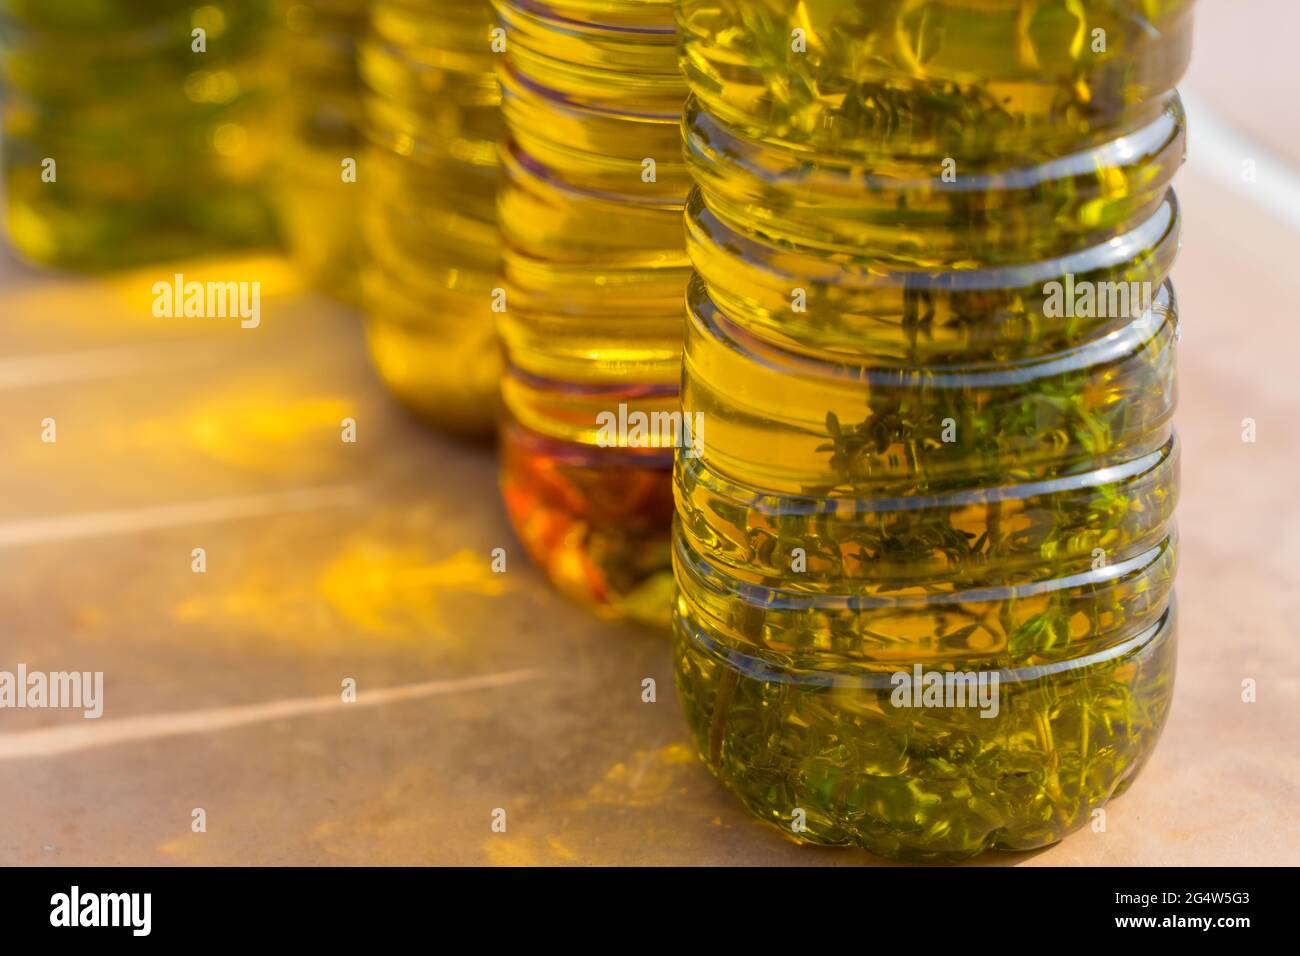 fresh cold-pressed olive oils created with thyme and aromatic mediterranean herbs Stock Photo